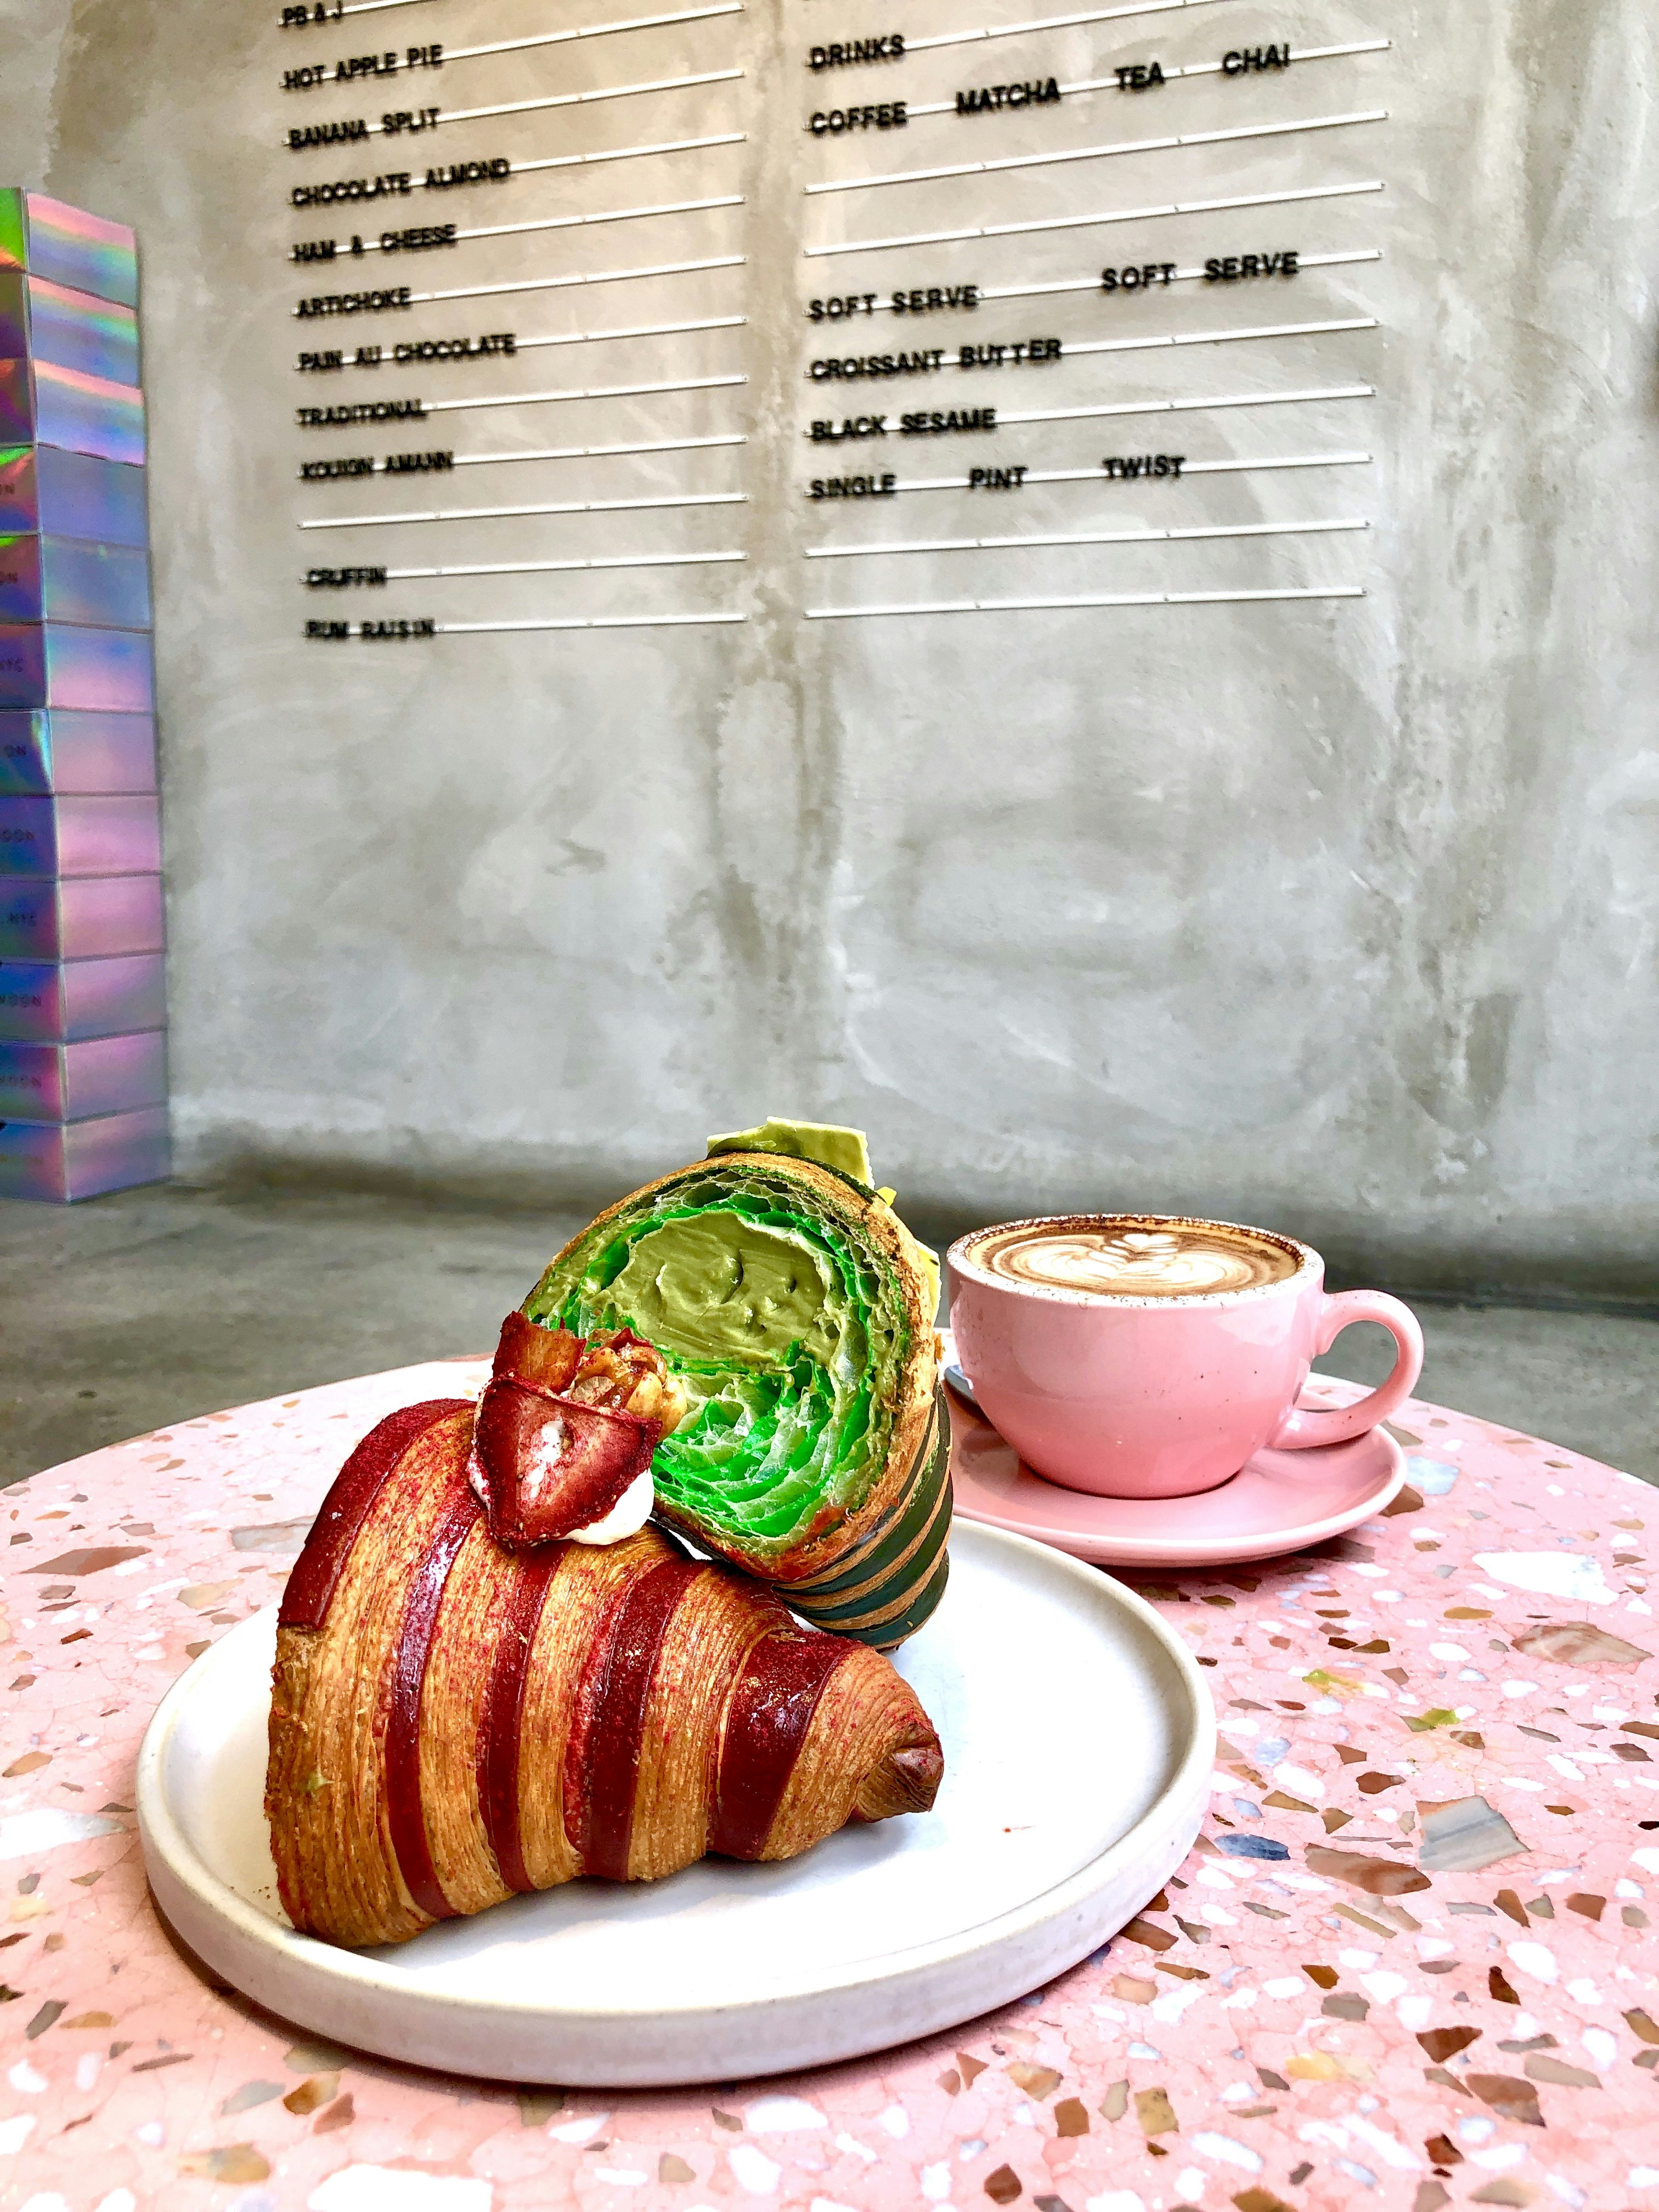 A croissant cut in half with green on the inside, garnished with a strawberry, beside a rose colored cup of coffee on a pink table and a menu on the wall behind it at Supermoon Bakehouse, New York City